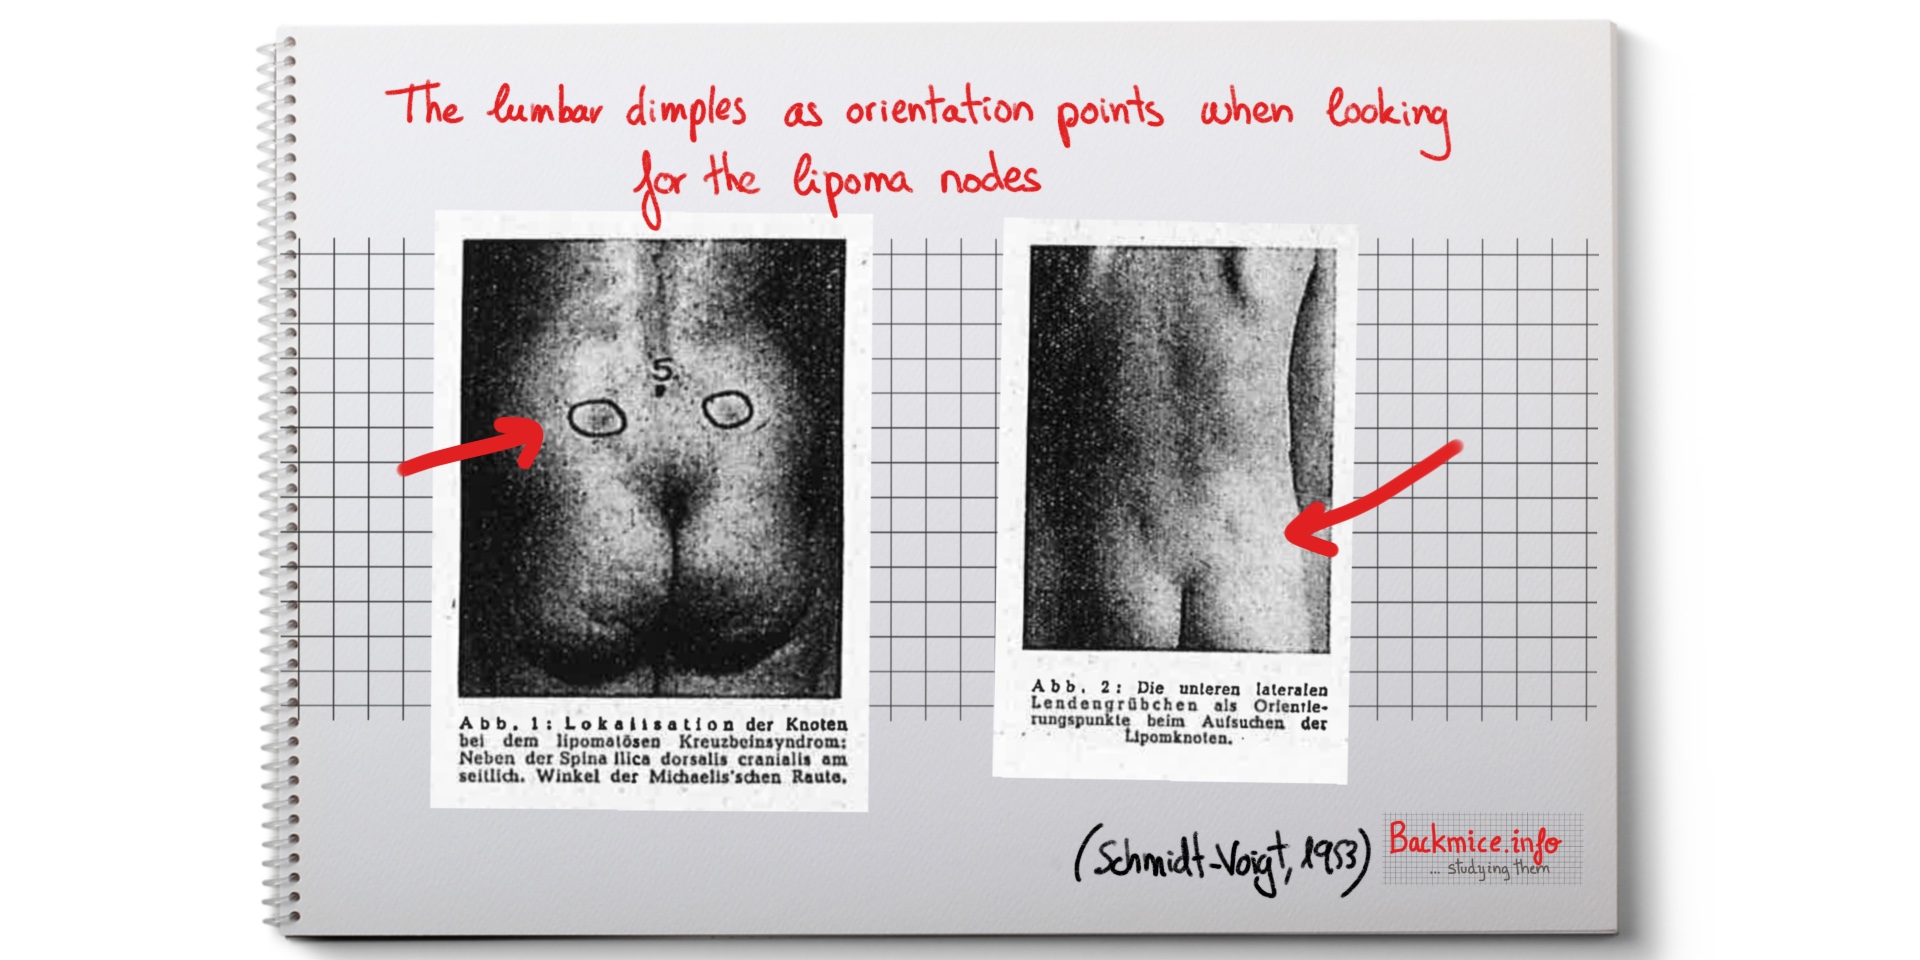 The lumbar dimples as orientation points when looking for the lipoma nodes